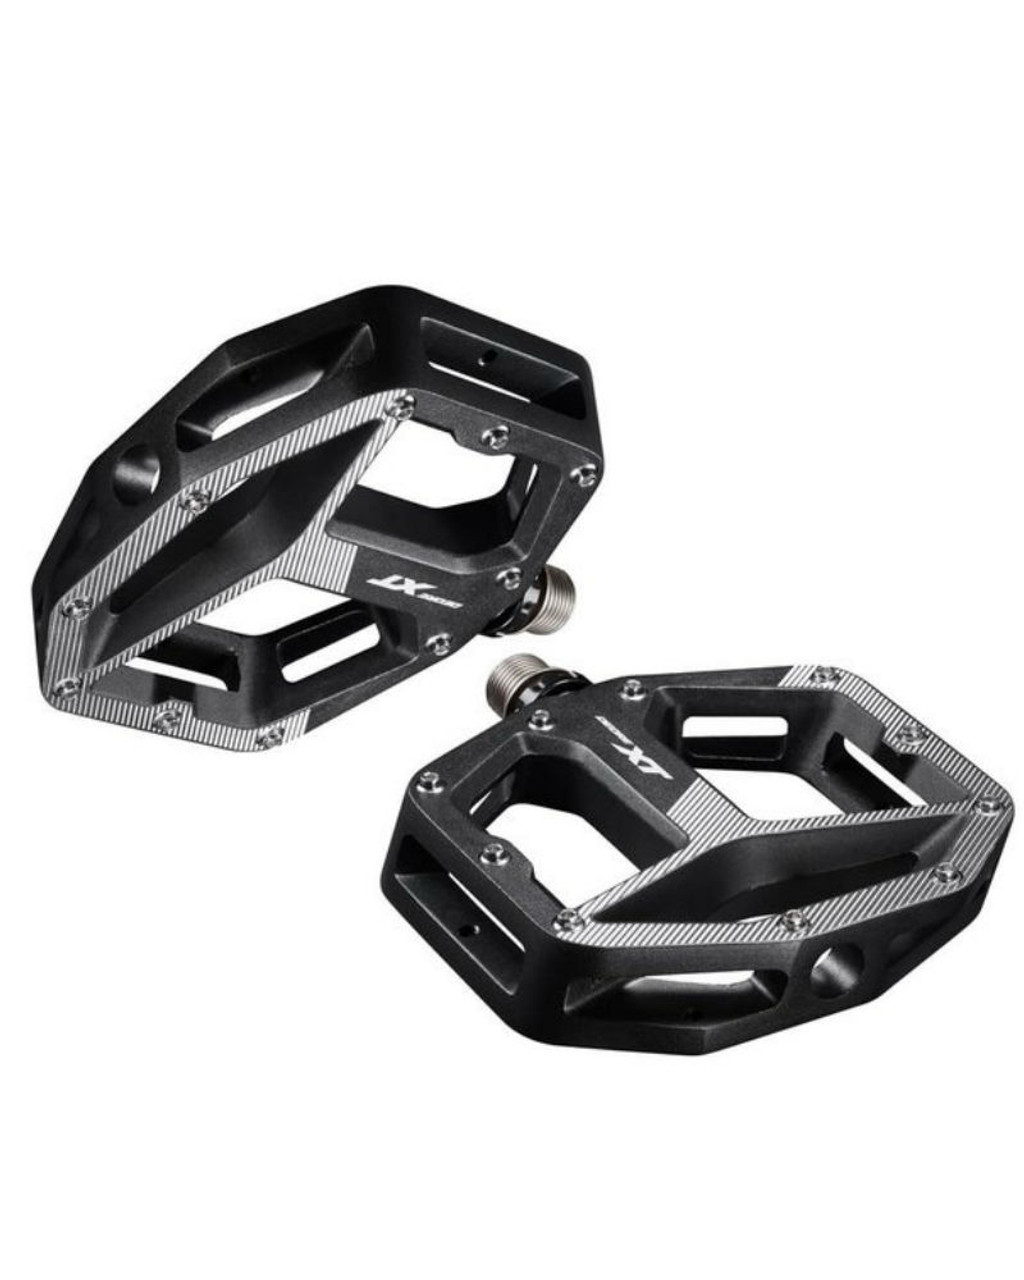 shimano flat pedals